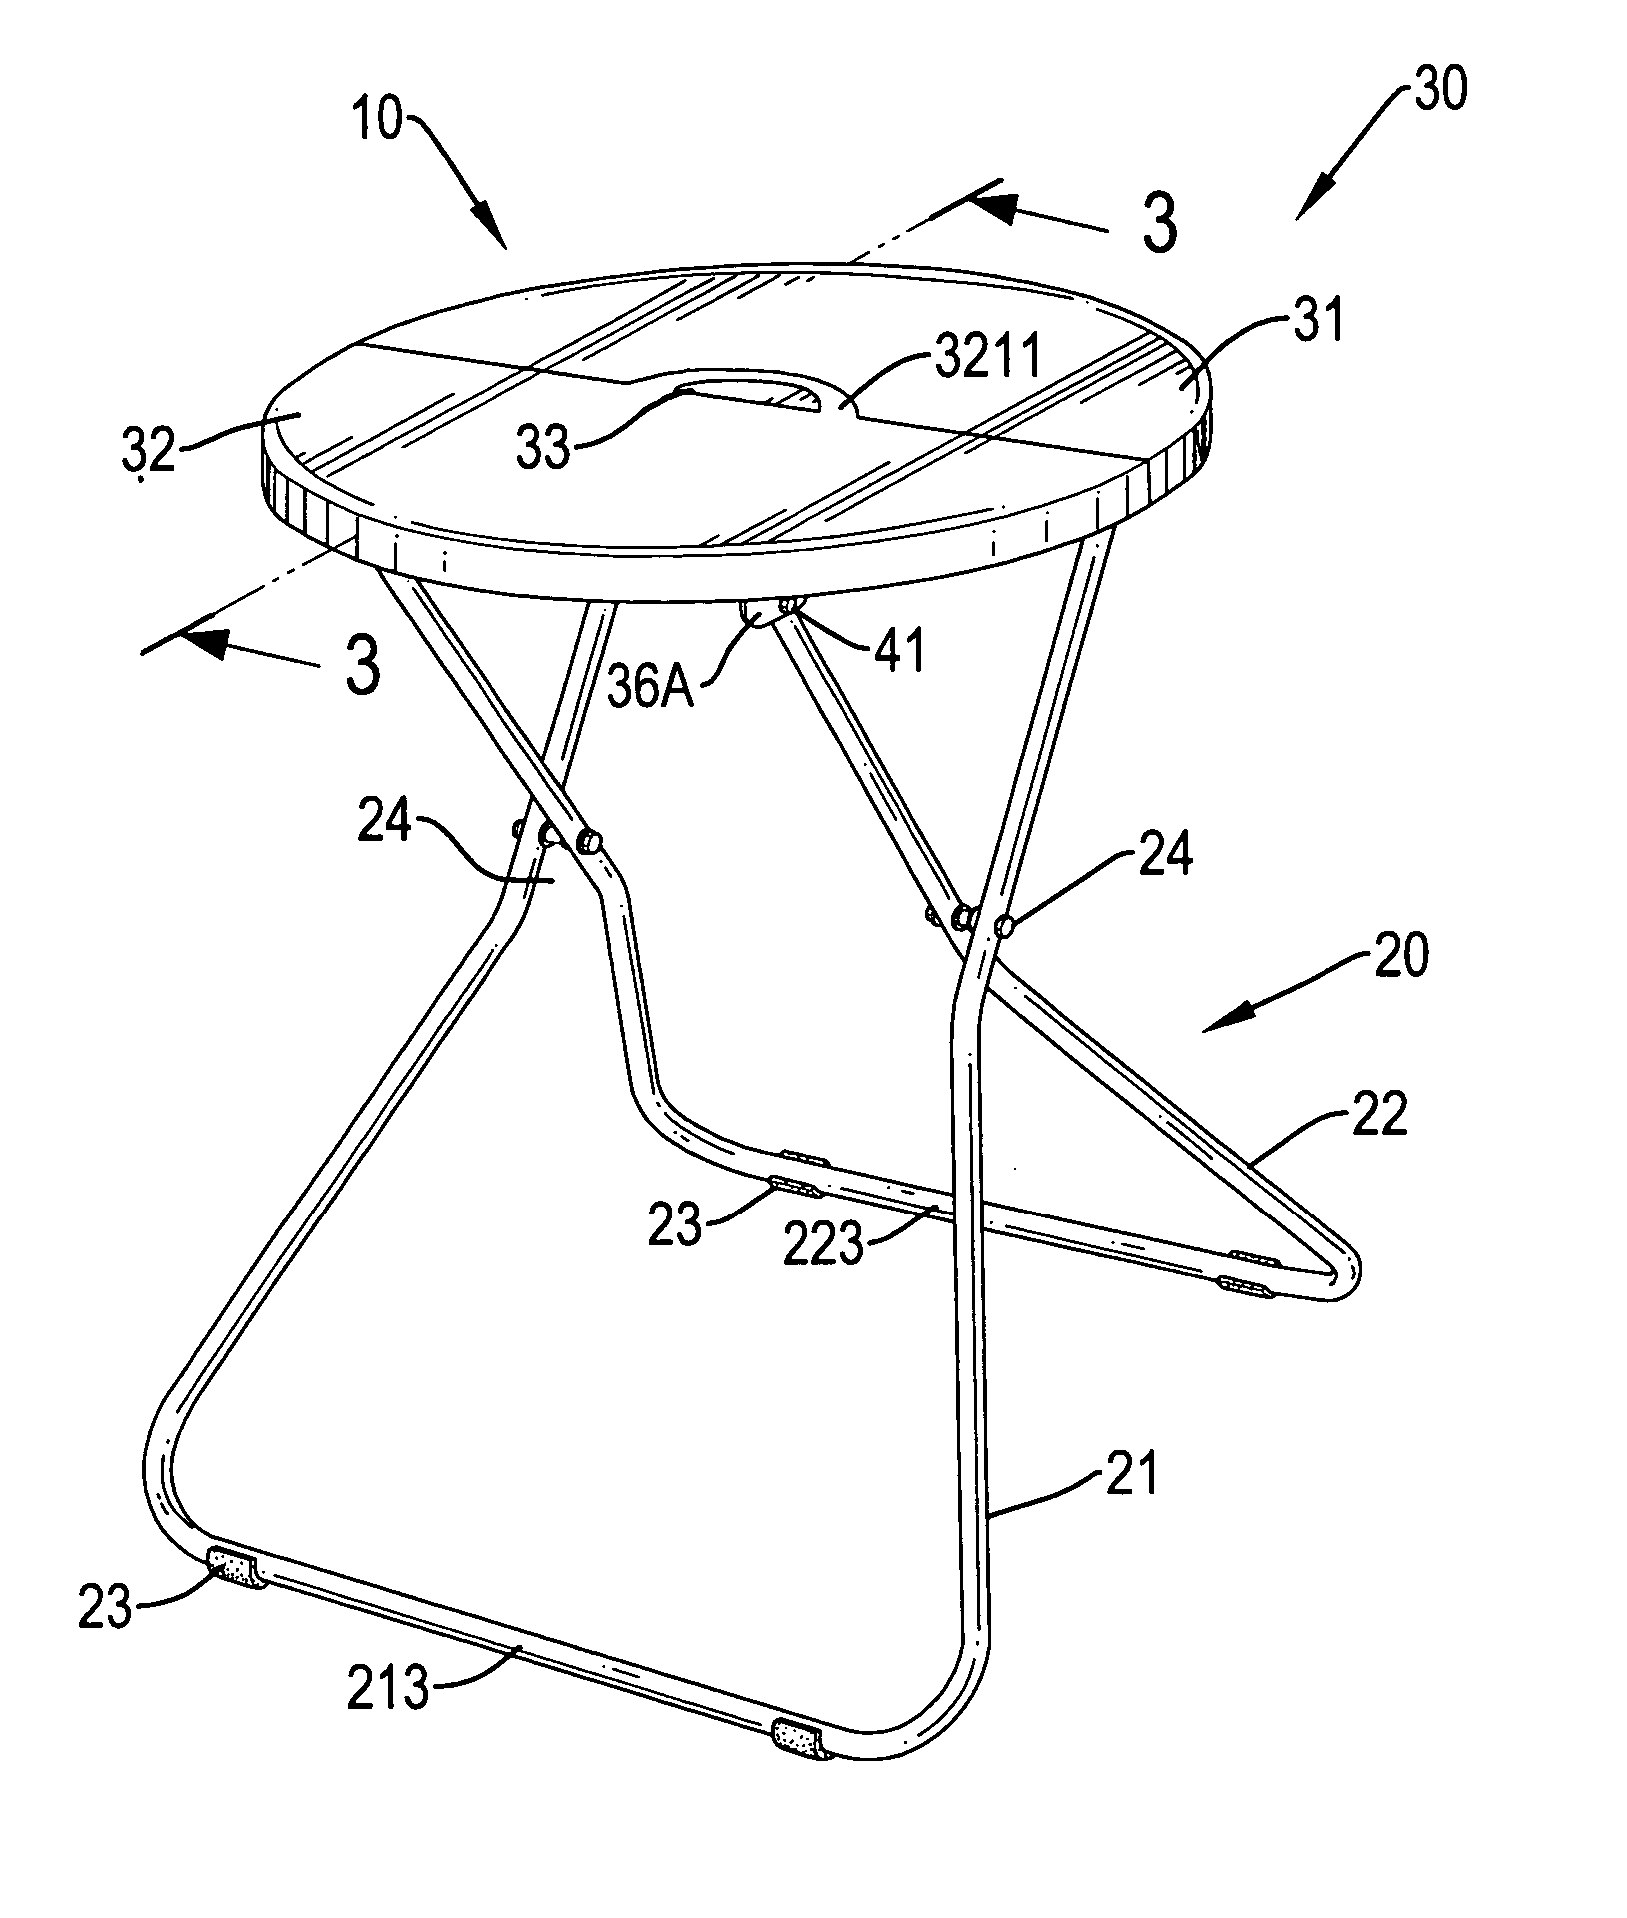 Table with a foldable tabletop